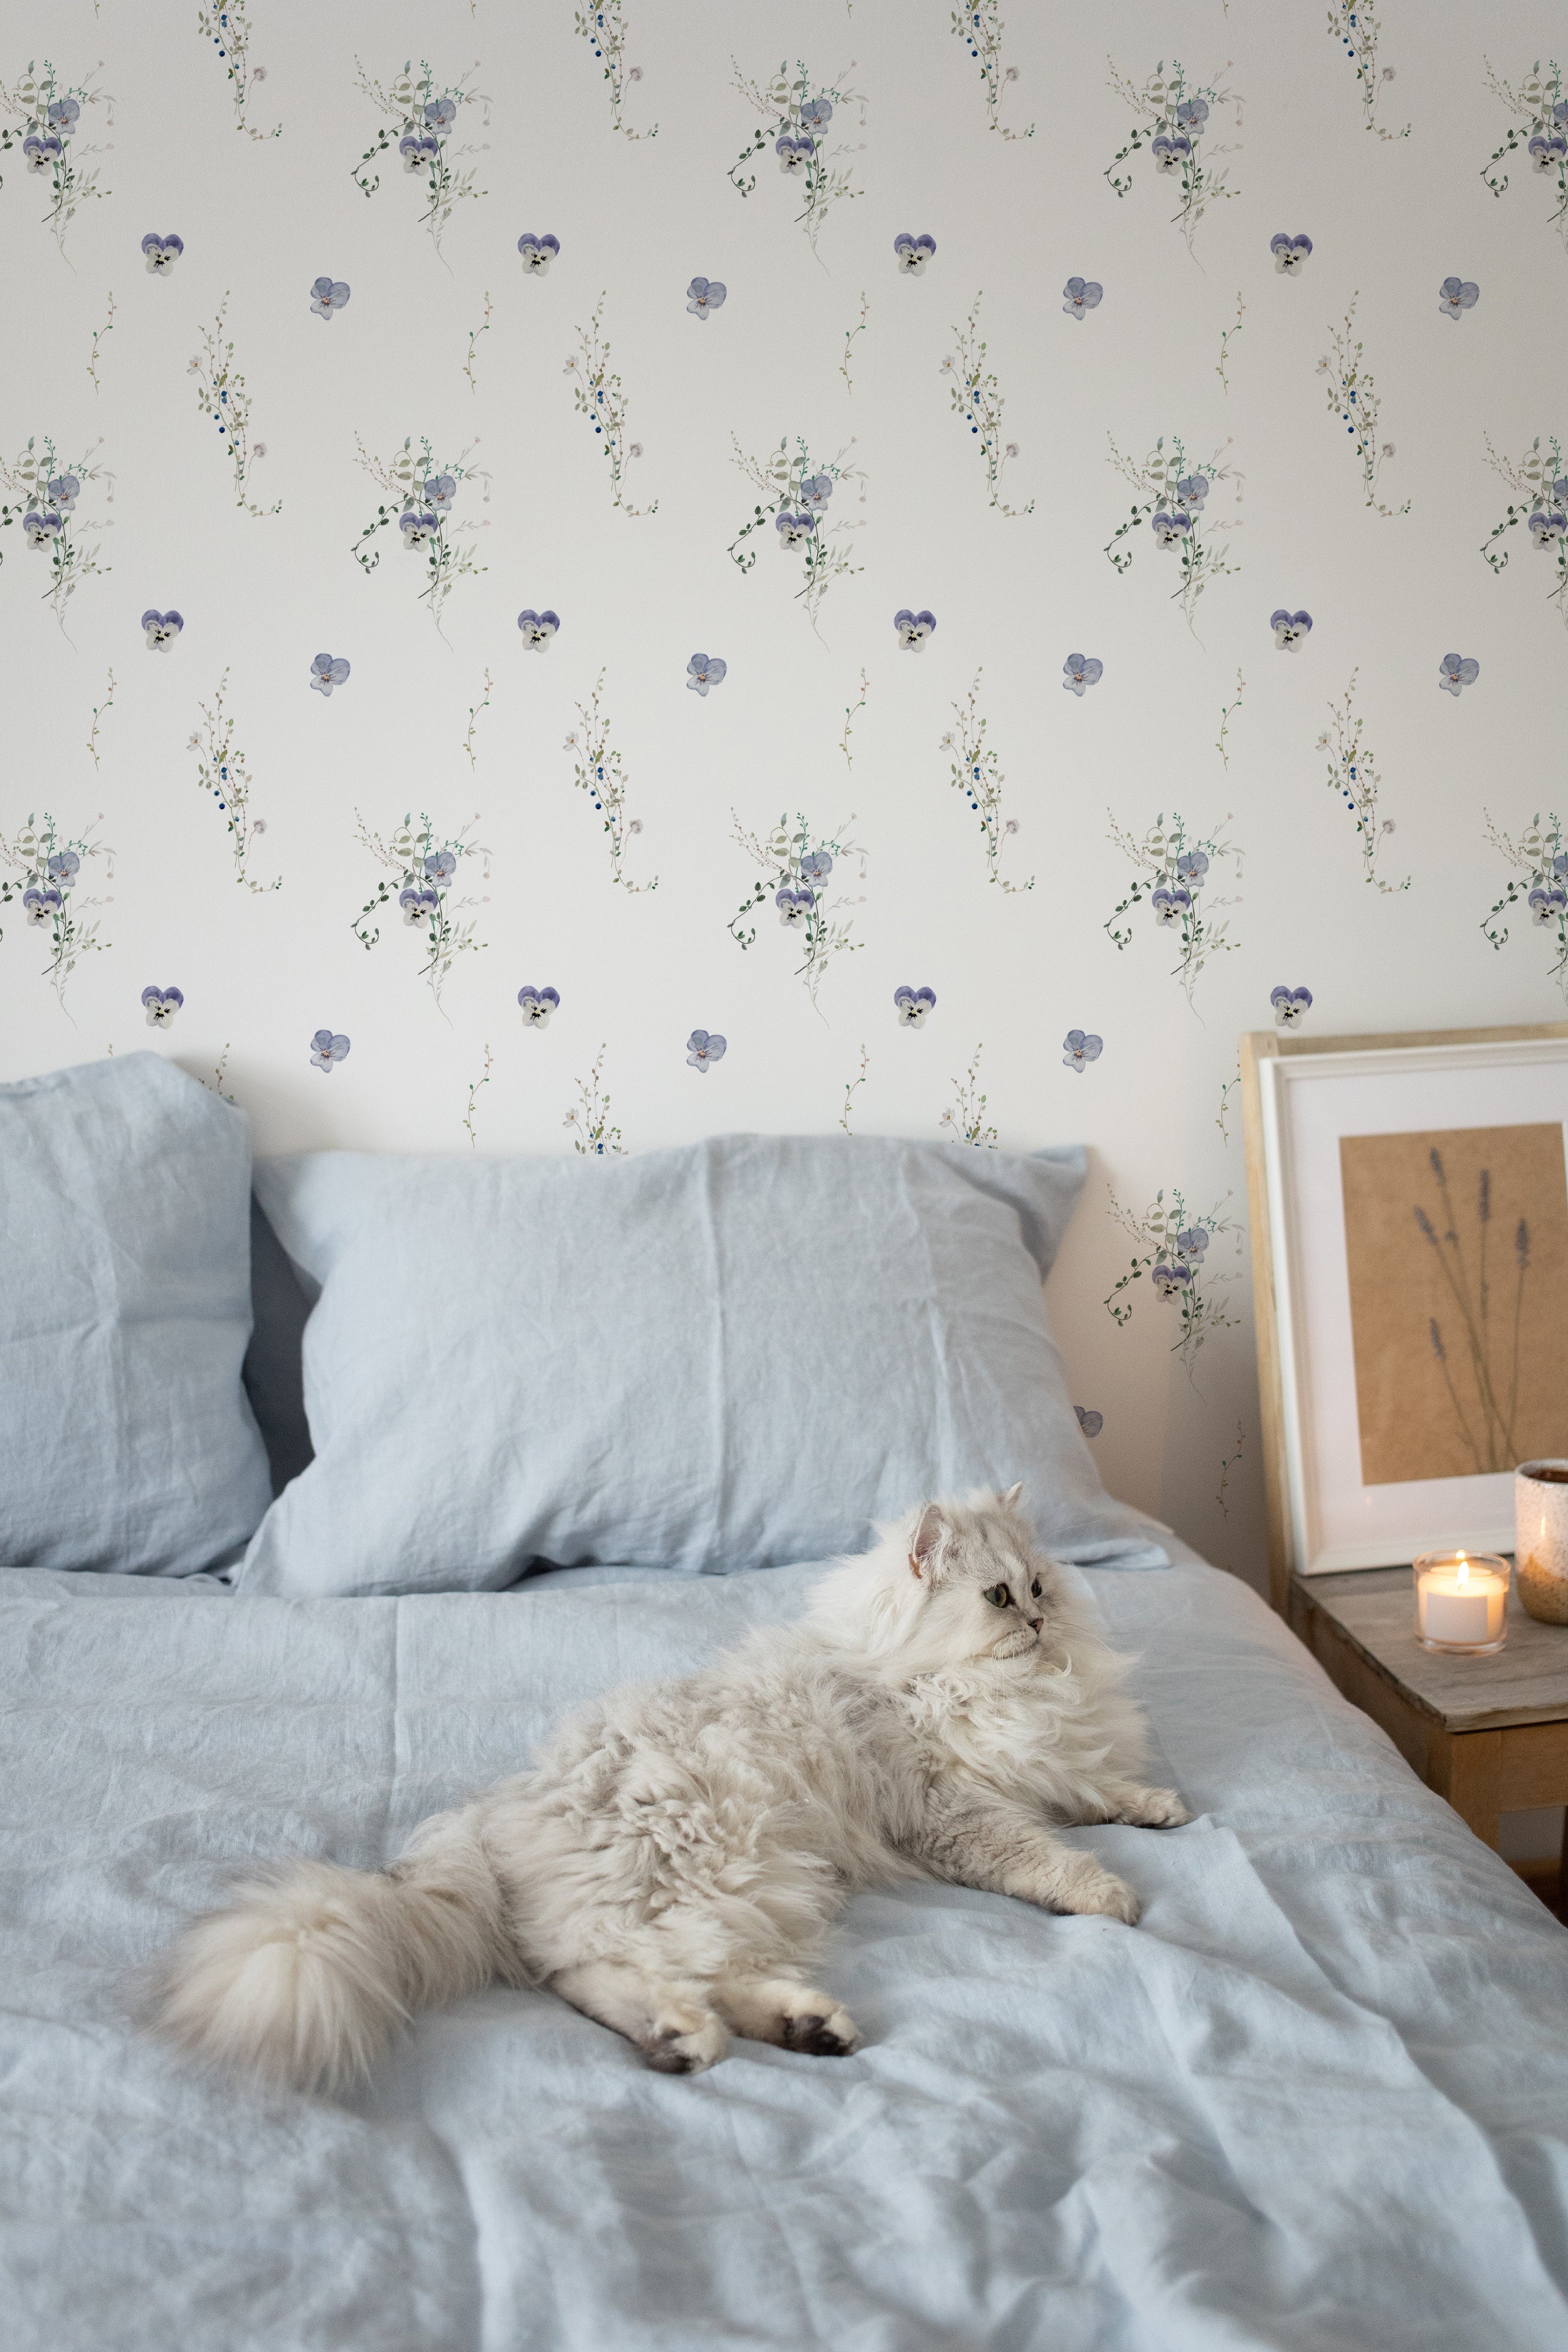 A bedroom with soft blue bedding matching the Delicate Blue Wildflower Wallpaper on the wall. The wallpaper features sprigs of blue wildflowers with green leaves, adding a serene and natural touch. A fluffy white cat lounges on the bed, blending in with the peaceful decor.